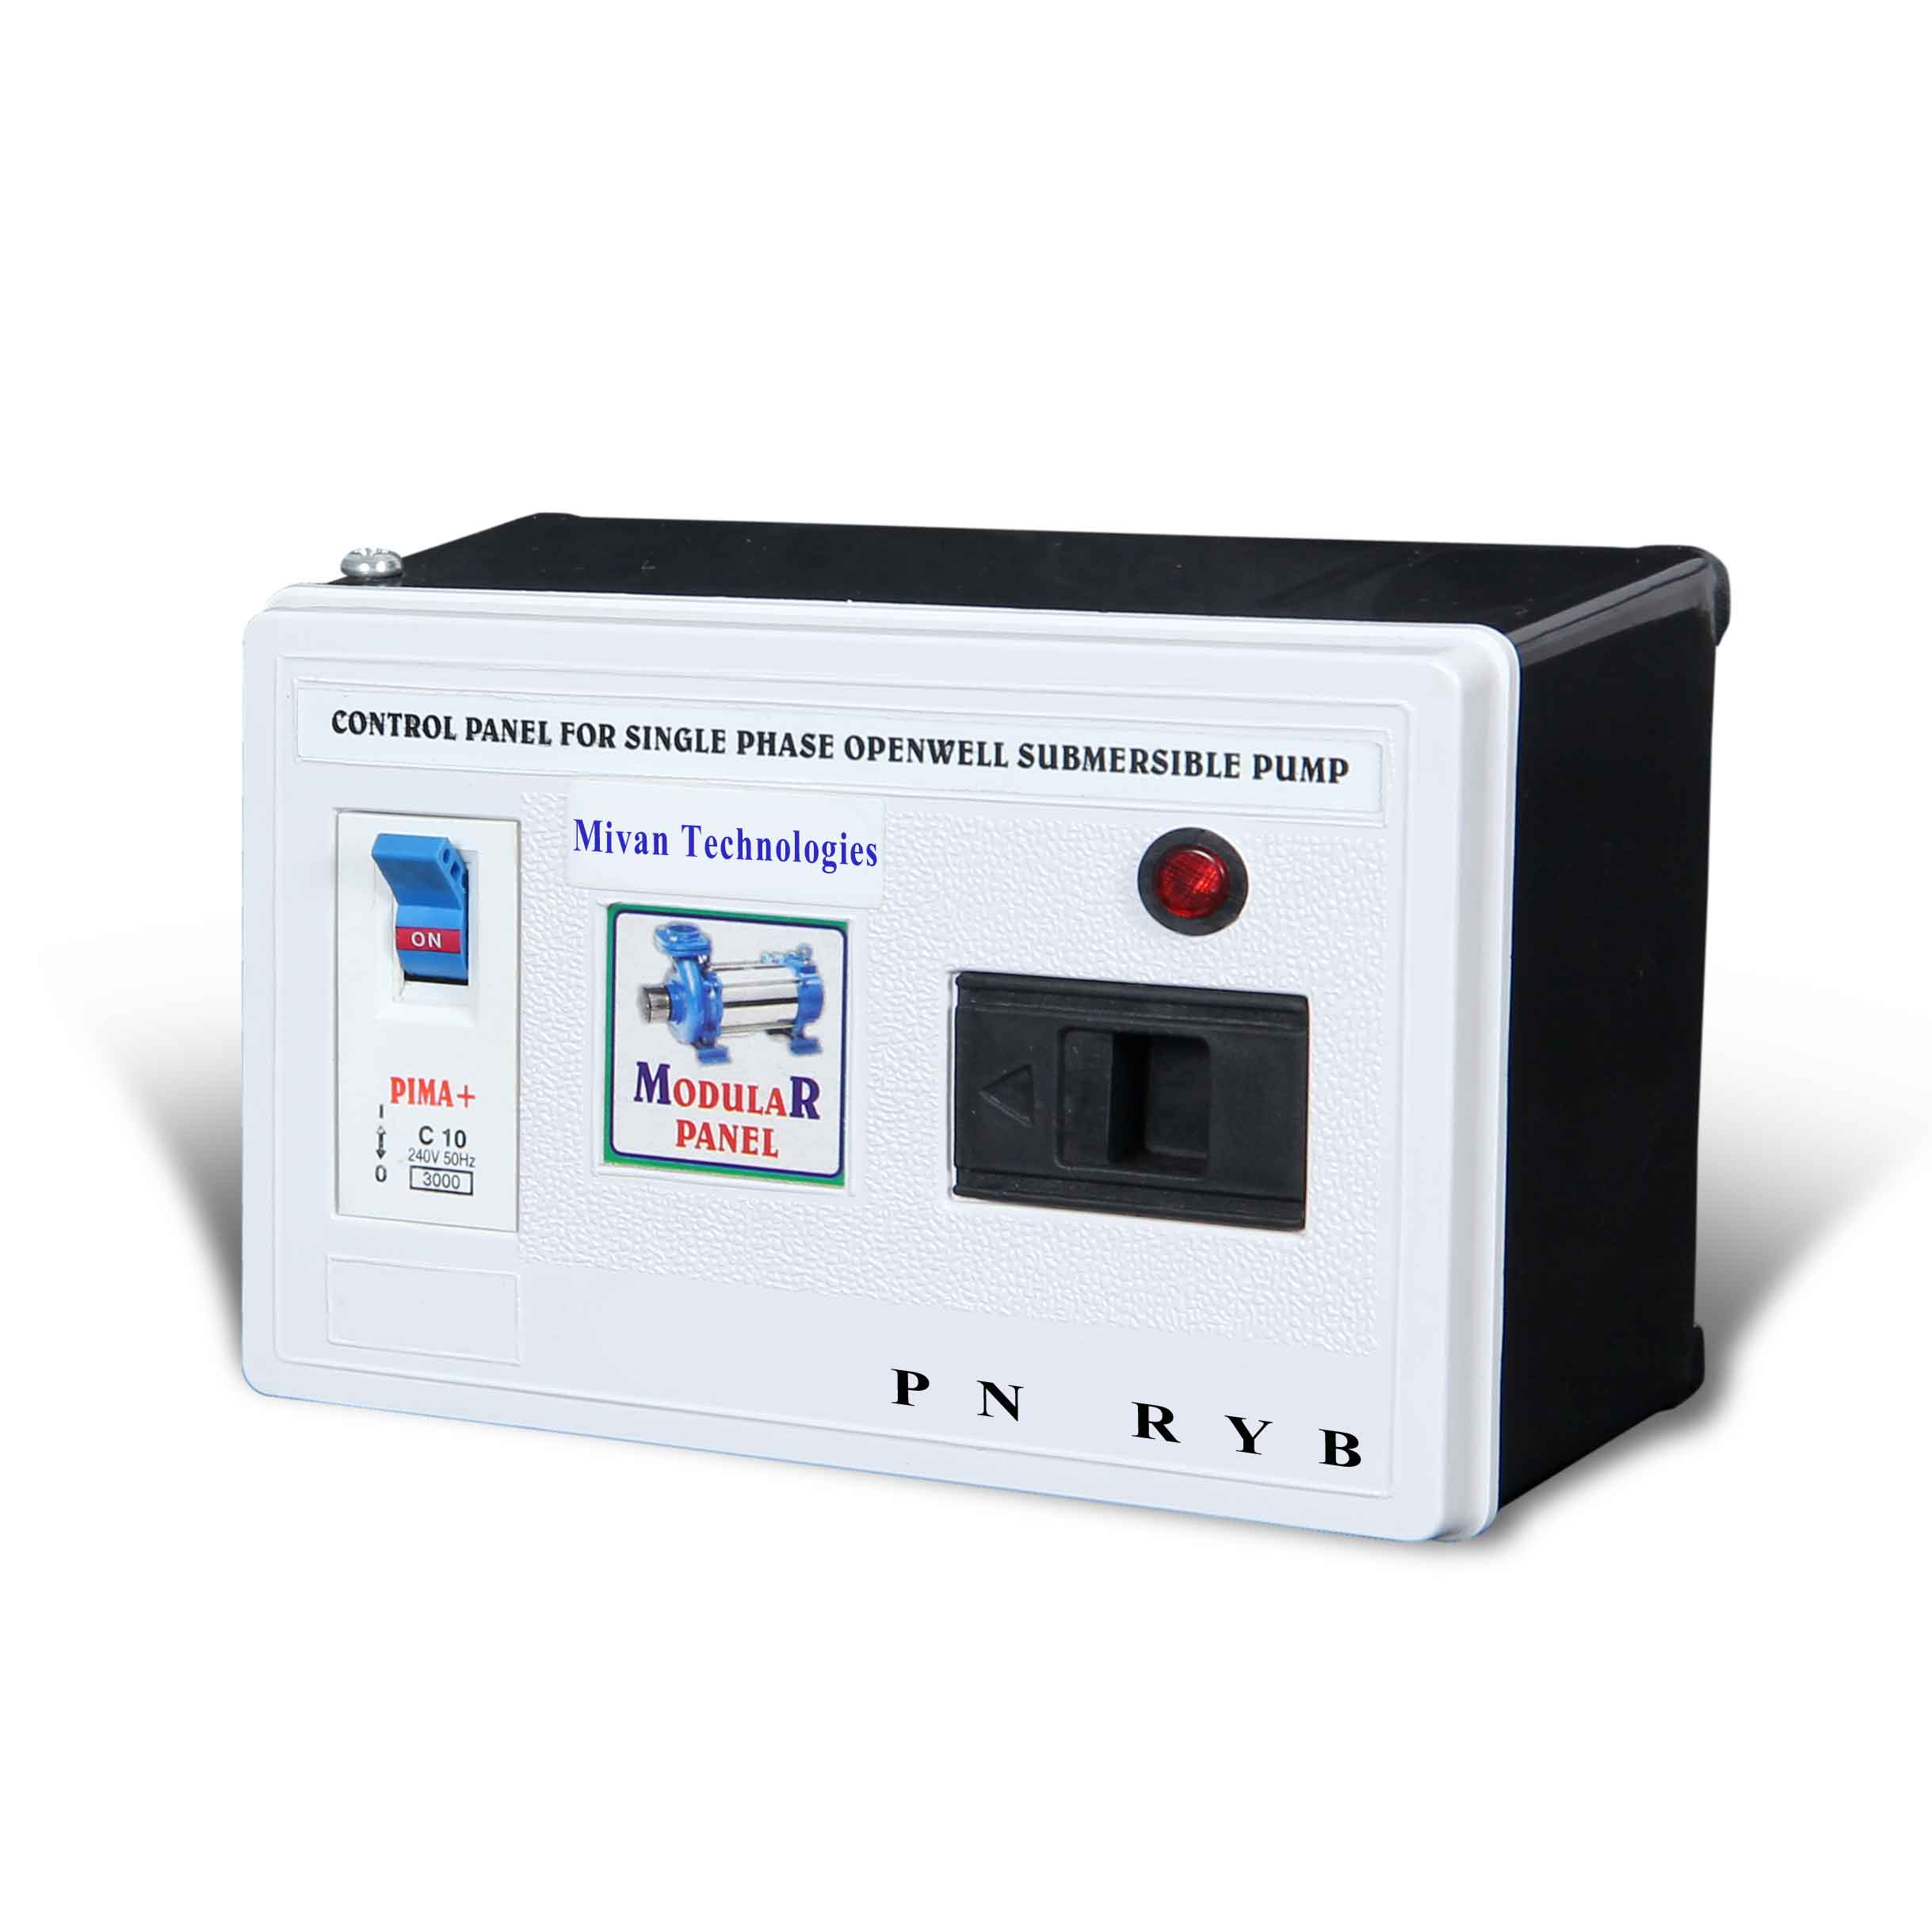 Single Phase motor starter suitable for all single phase submersible motor and pump suitable up to 1.5 hp motor